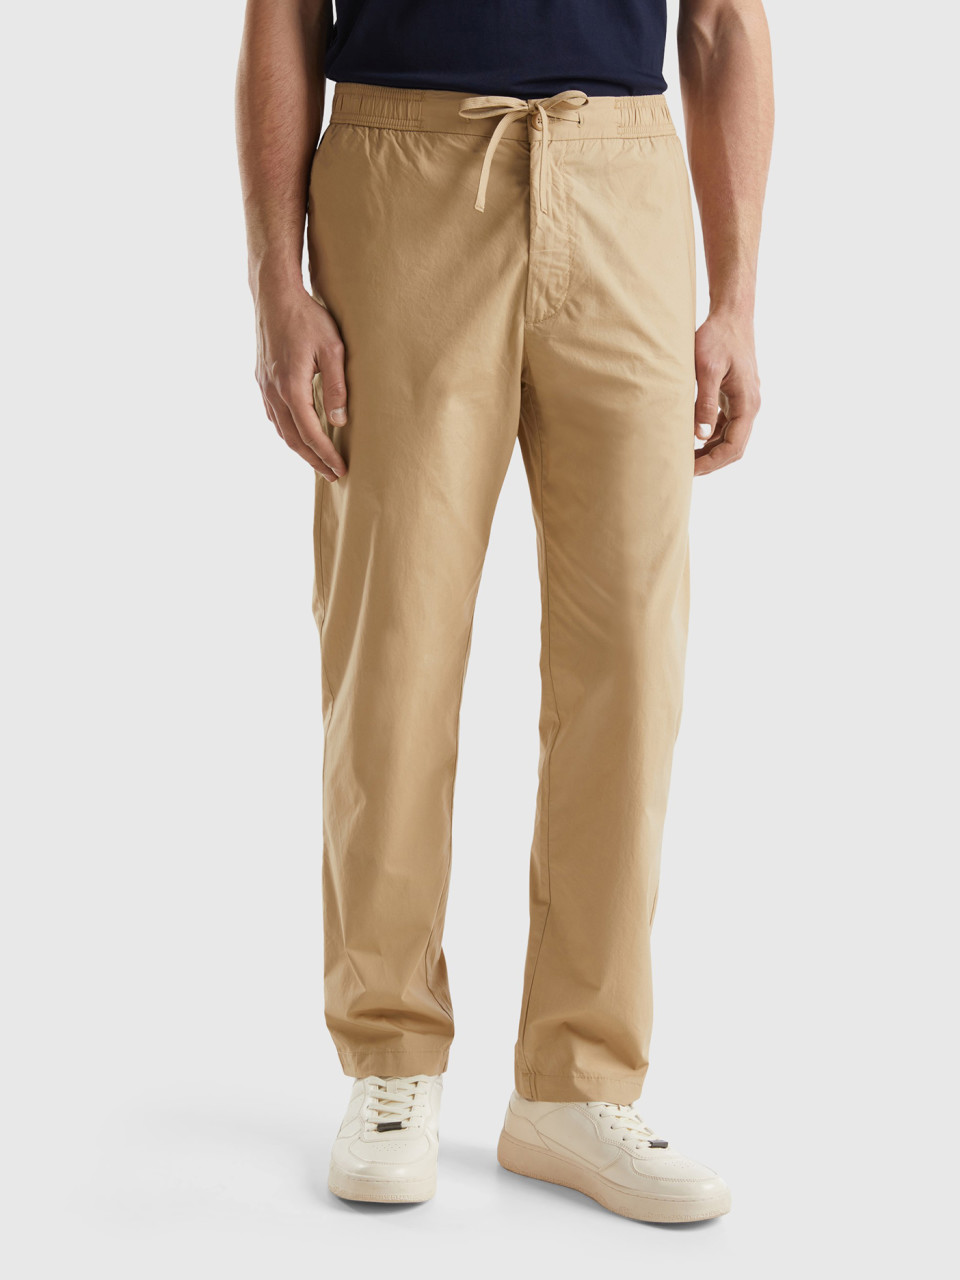 Benetton, Canvas Trousers With Drawstring, Beige, Men